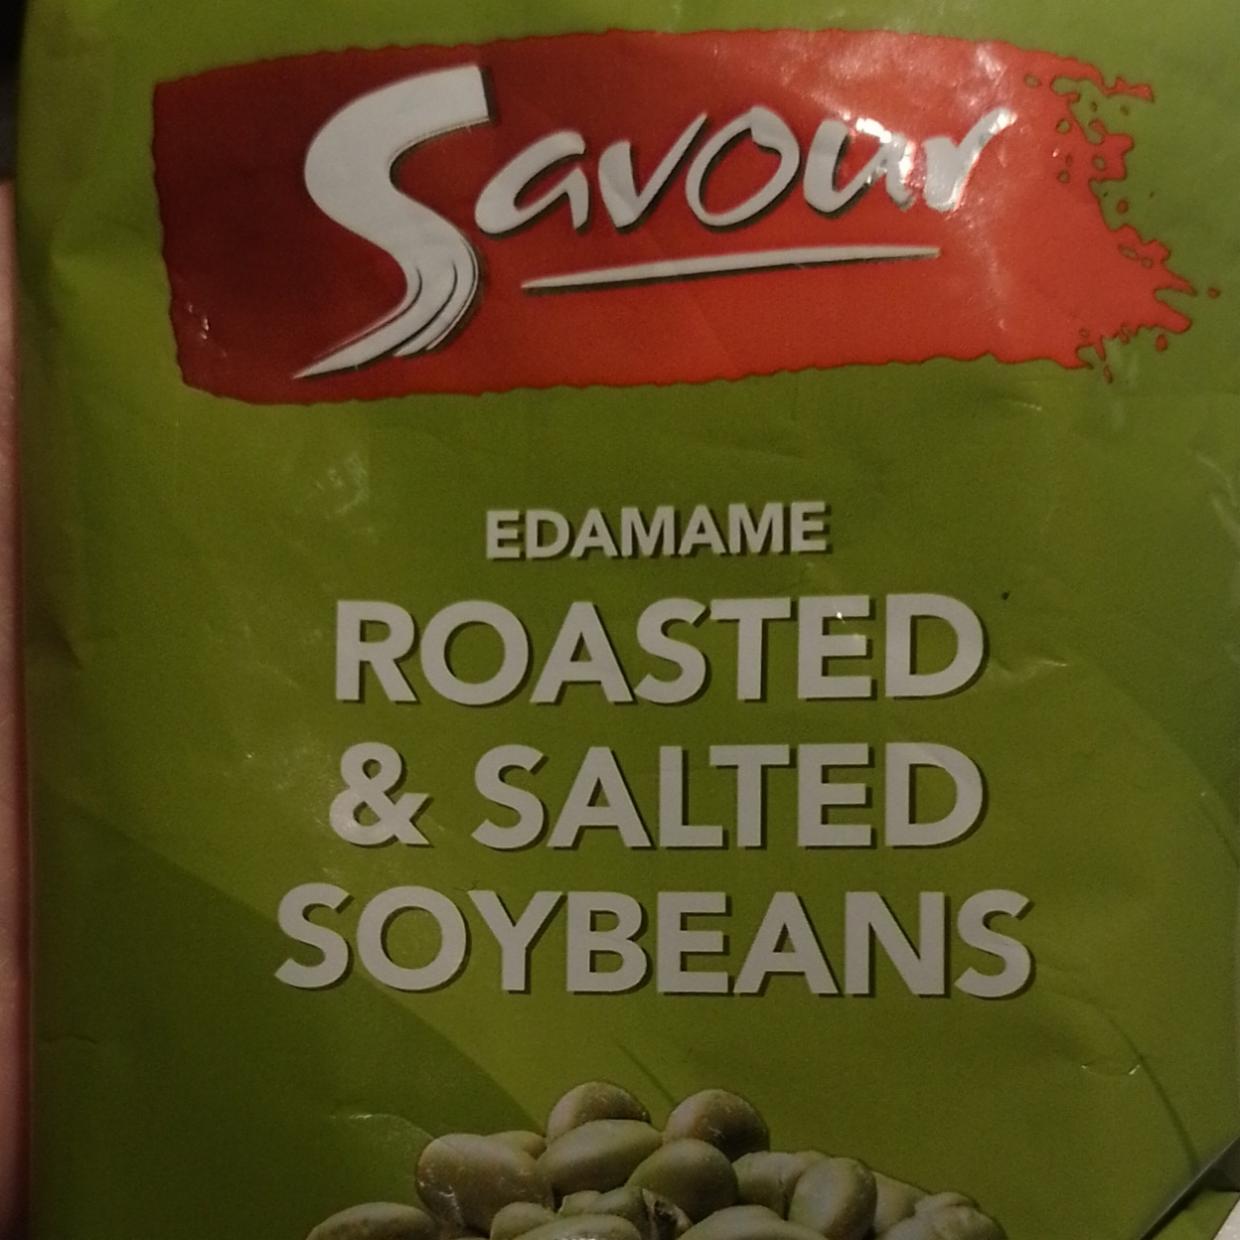 Fotografie - Edamame Roasted & Salted soybeans Savour